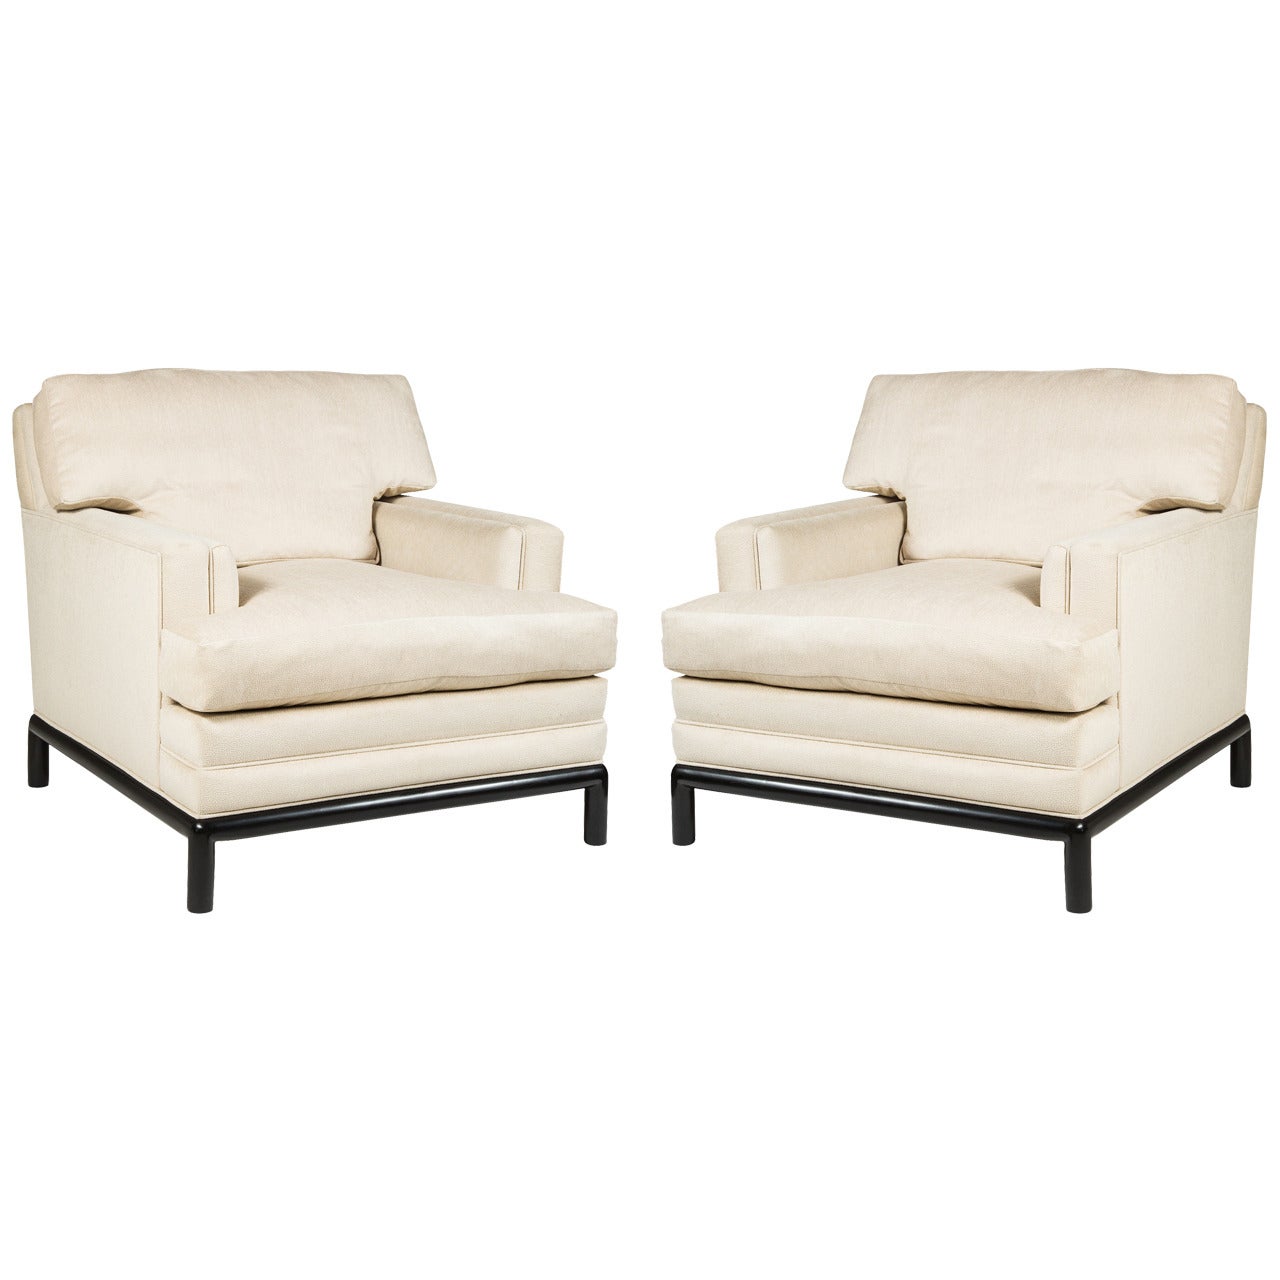 Pair of Loose Cushion Club Chairs by Monteverdi-Young